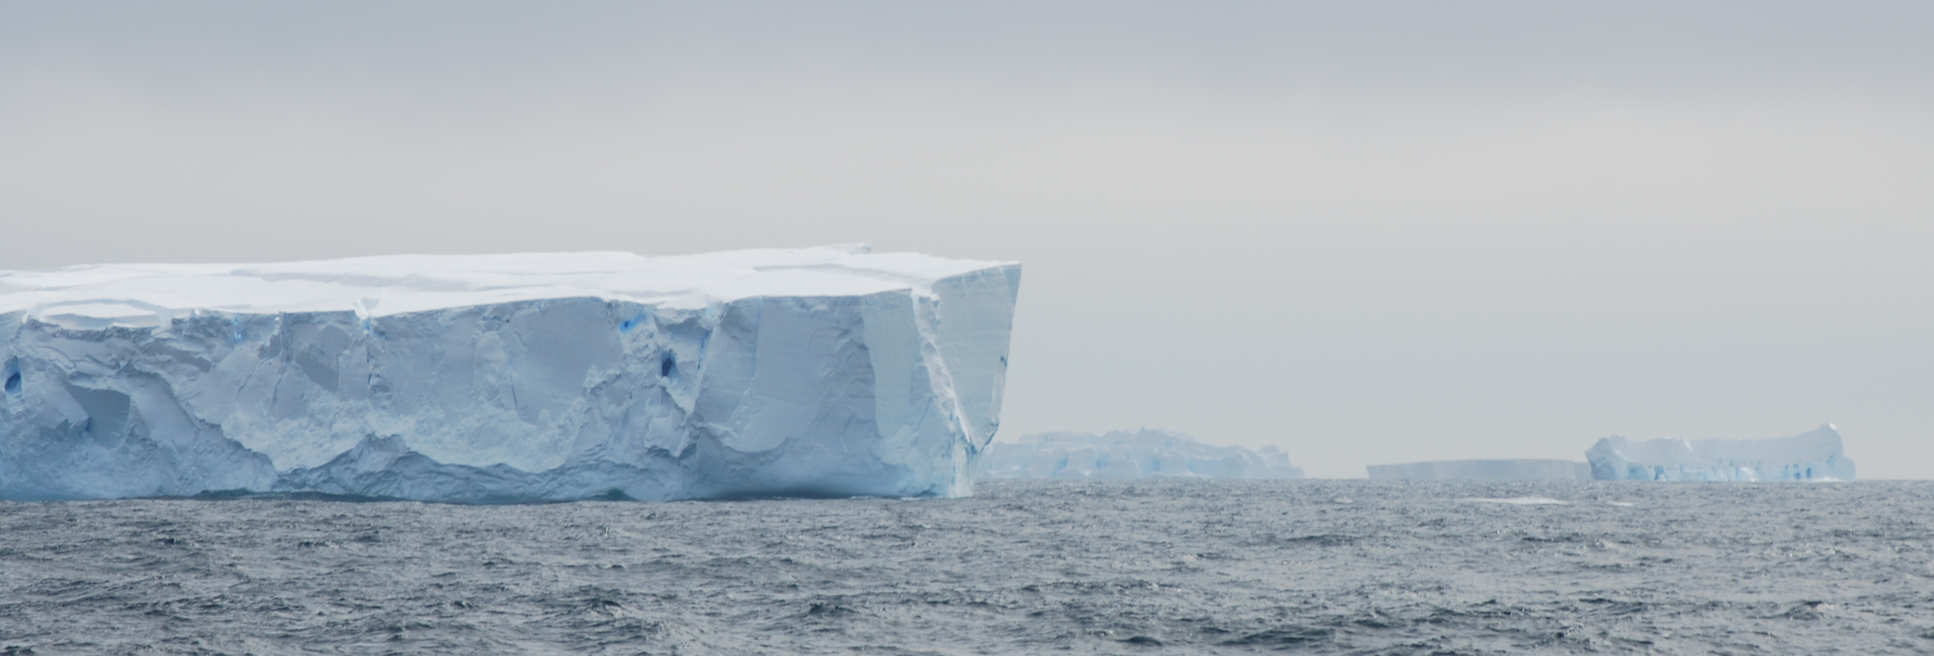 Photo of icebergs in the Southern Ocean, taken on expedition near the Wilkes Subglacial Basin